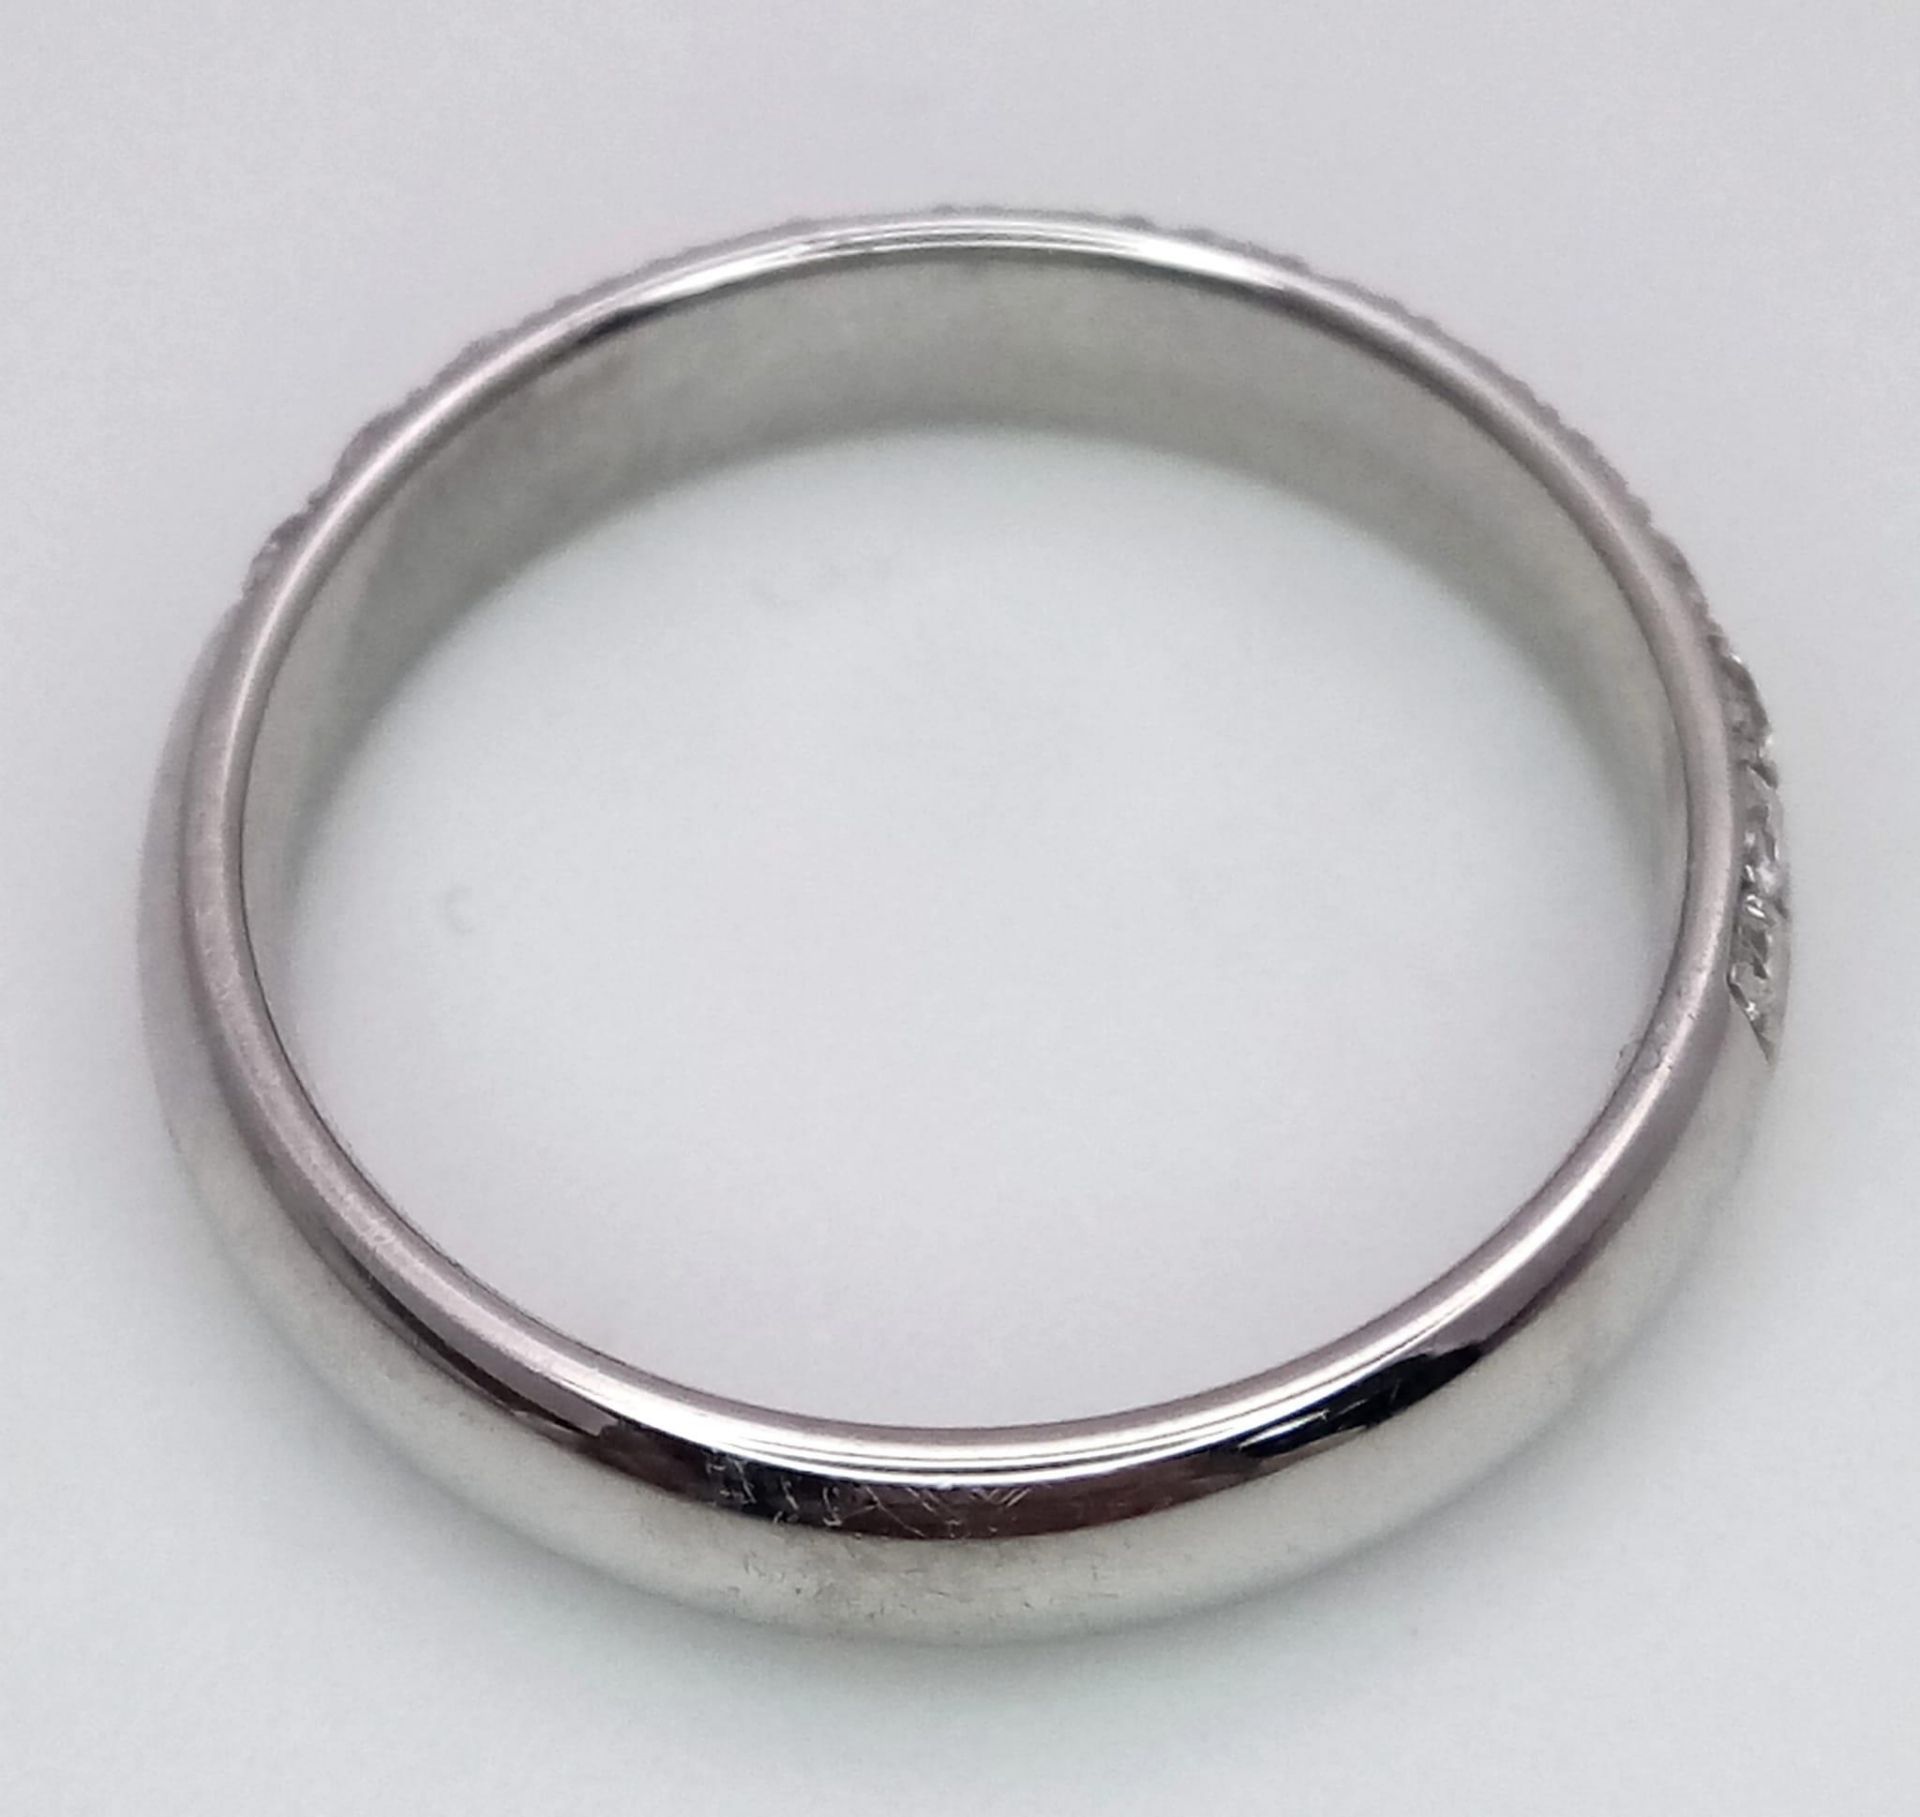 A 950 Platinum Diamond Half Eternity Ring. Size M/N. 6.5g total weight. Ref: 15813 - Image 3 of 4